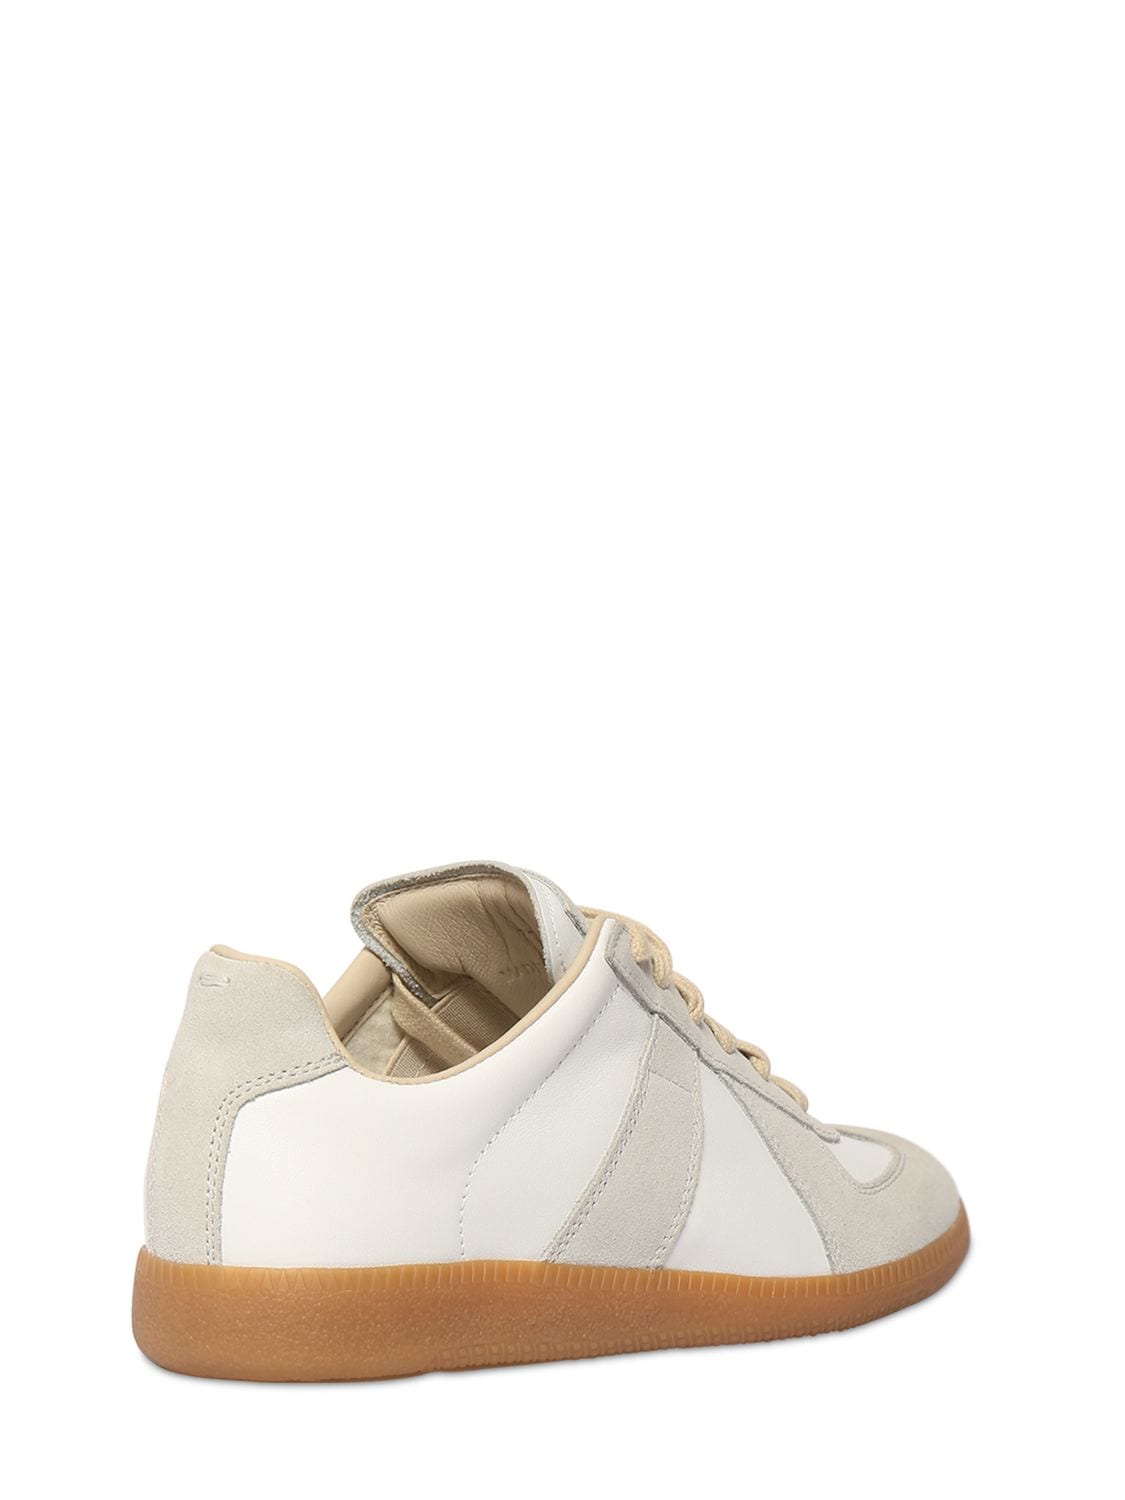 Maison Margiela Replica Leather And Suede Sneakers In White | ModeSens